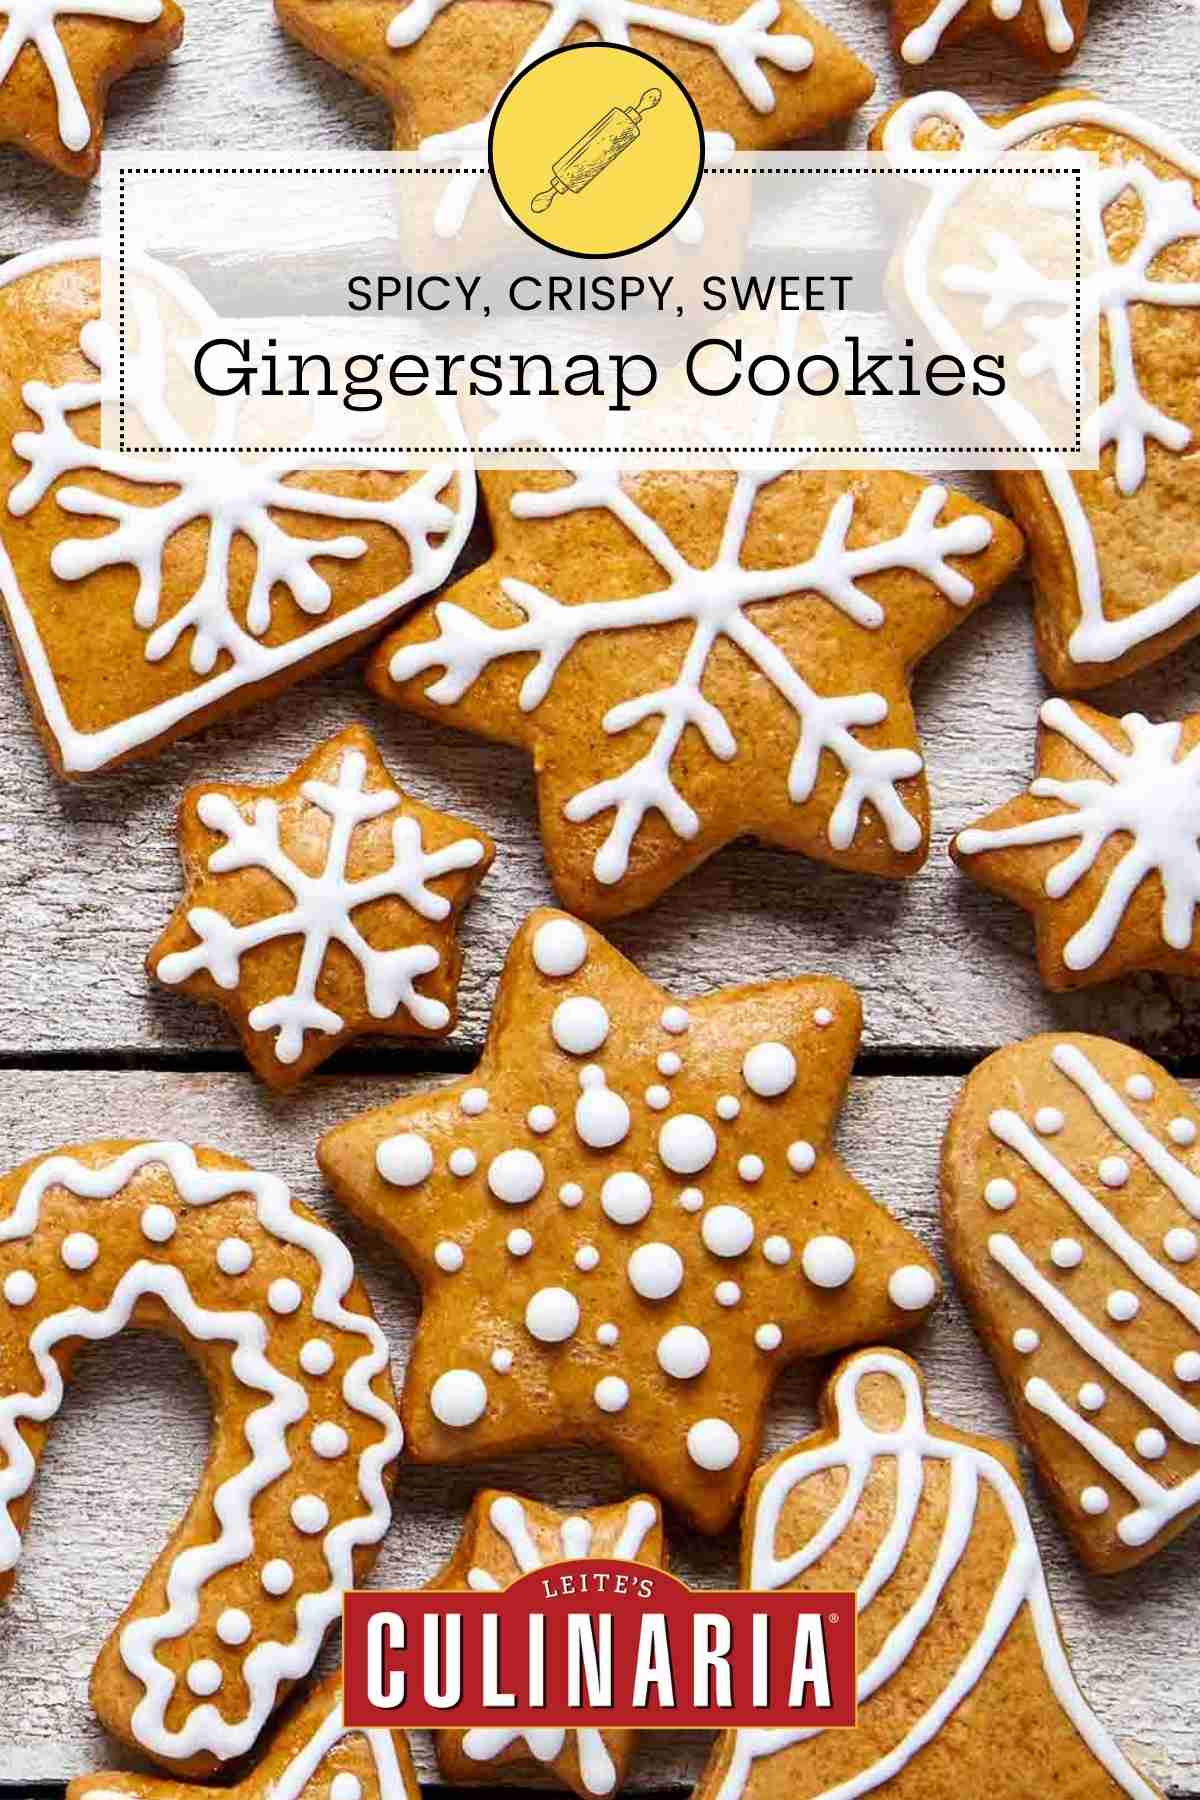 A variety of iced gingersnaps cookies cut into different shapes.